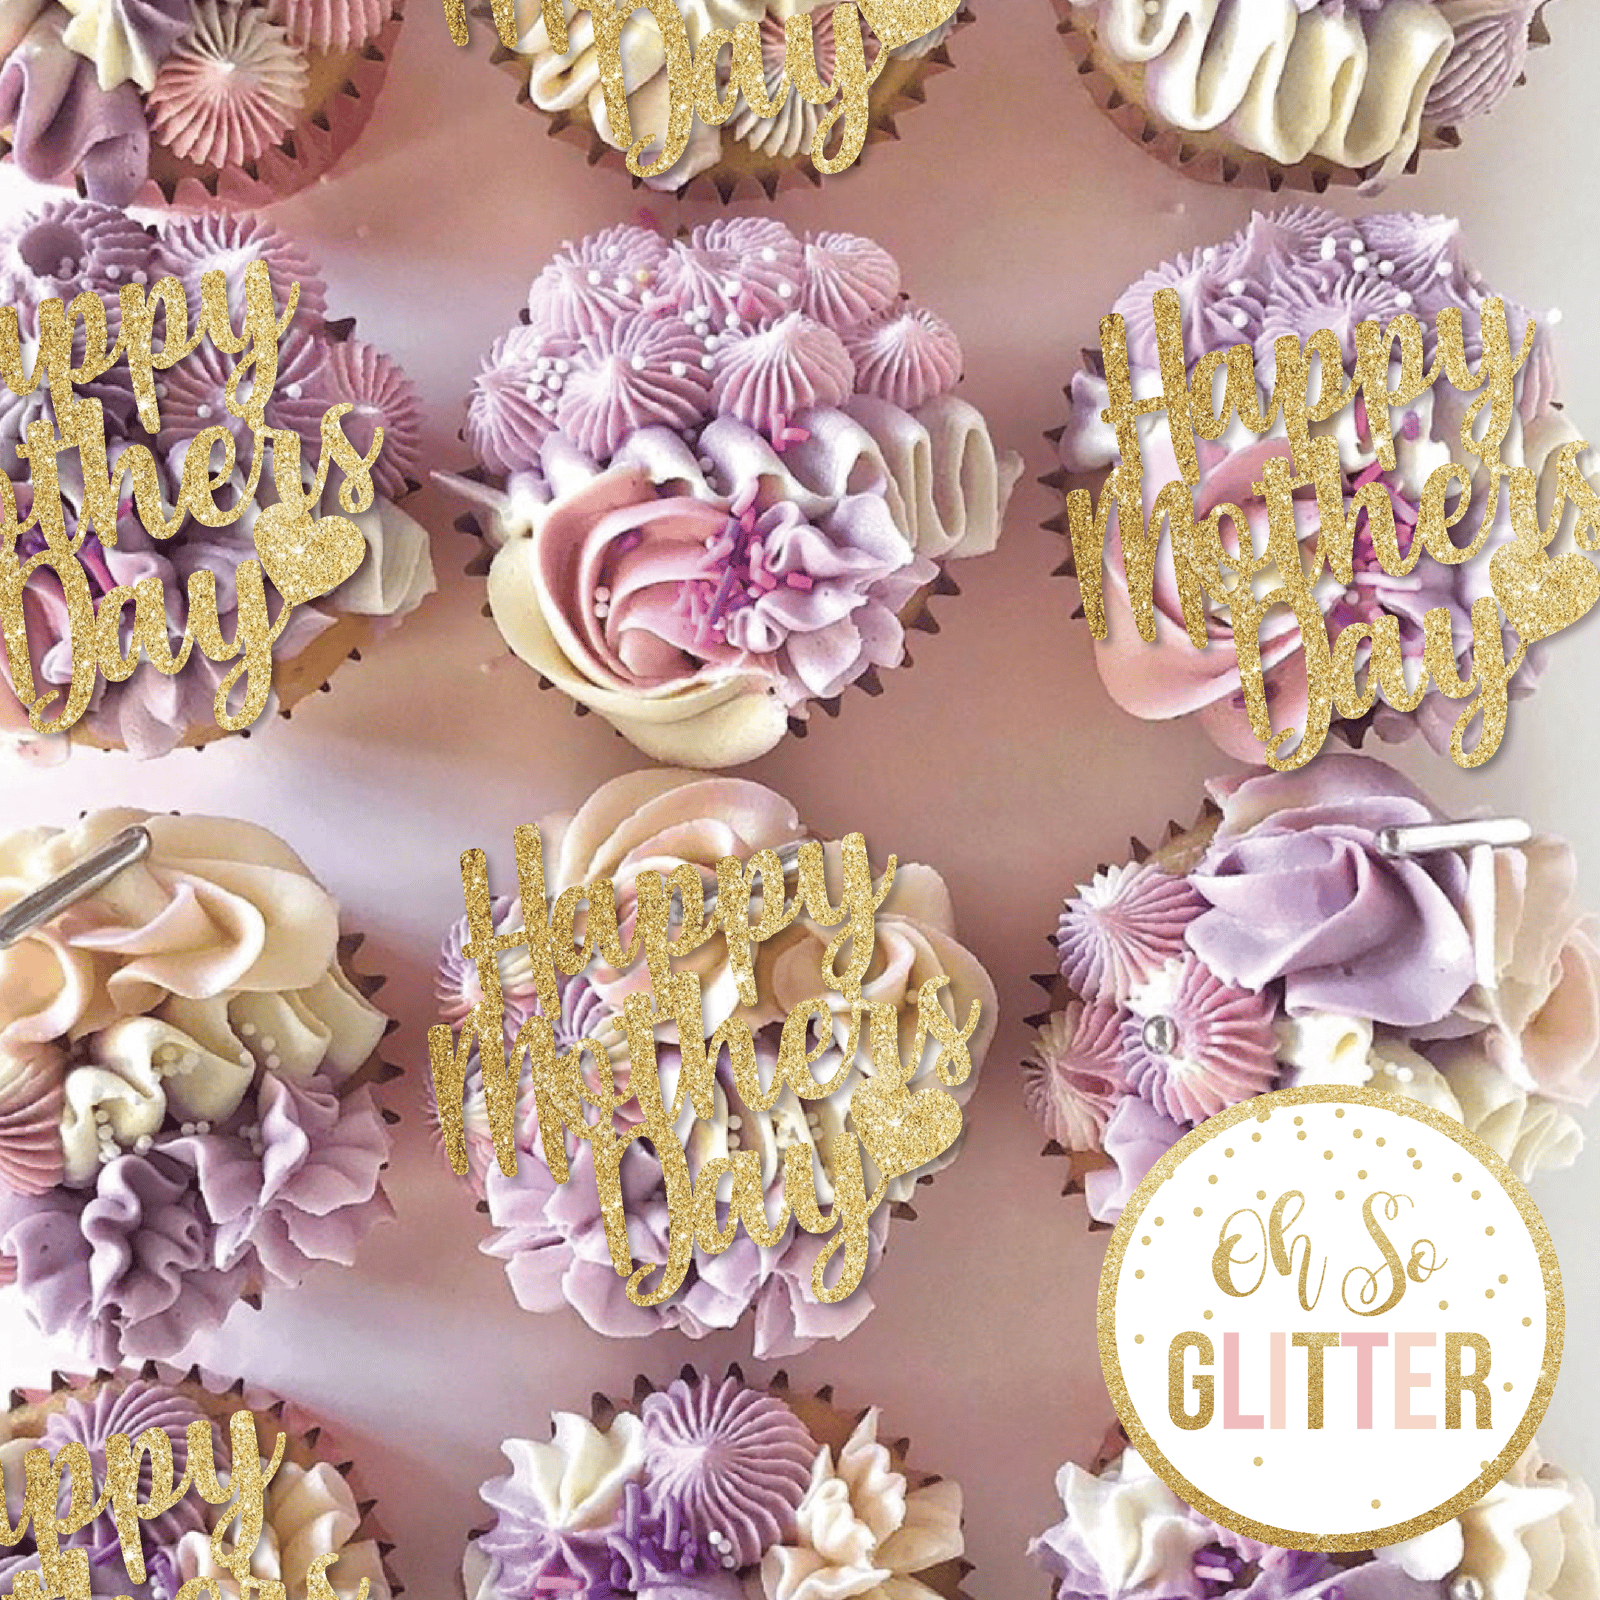 Details about   Happy Mothers Day Cup Cake Toppers with Hearts Pack of 6 Any Colour FREE UK P&P 